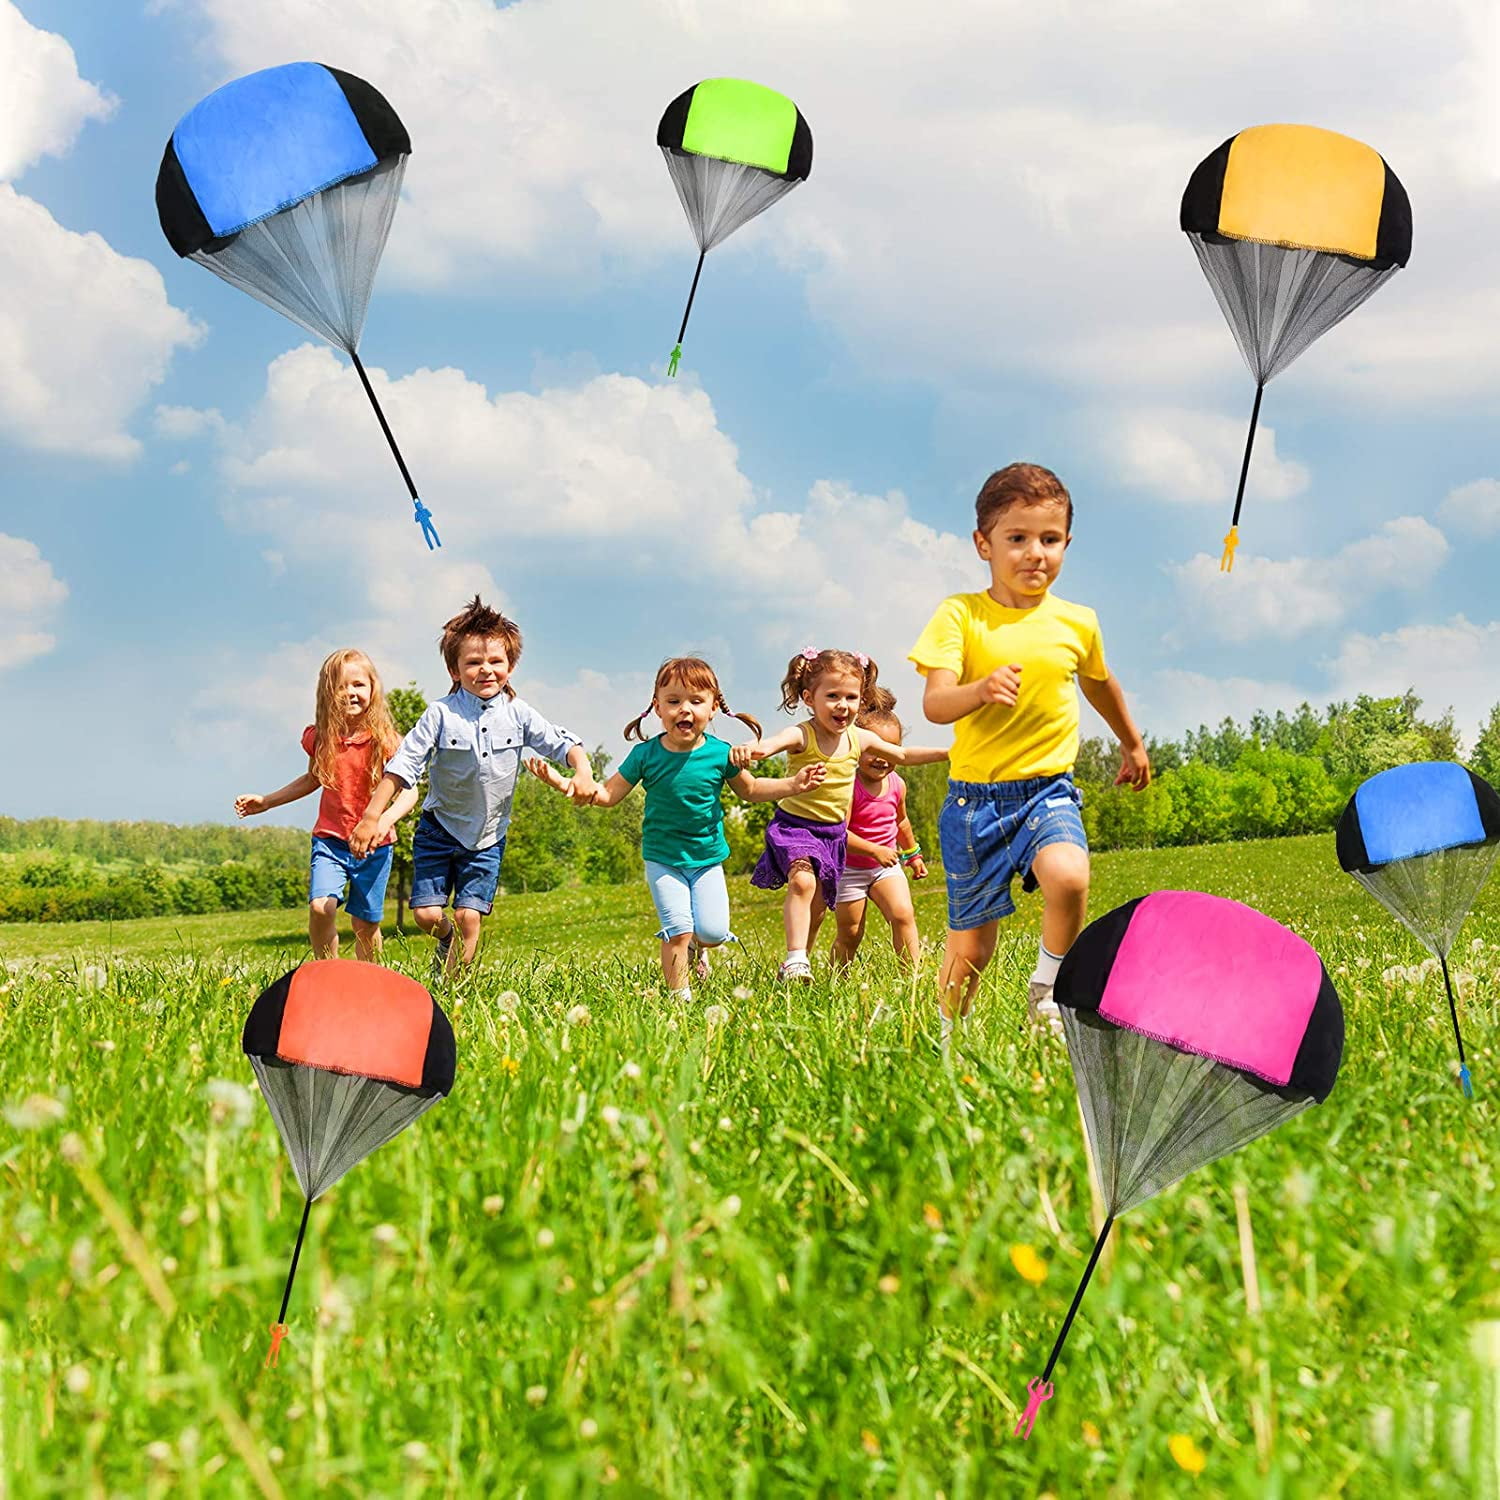 Kids Outdoor Toys Tangle Free Throwing Toy Parachute Ledorr 10 Pack Parachute Toy Flying Gifts for 3 4 5 6 7 8 9 10 Year Old Boy Girl Toy 